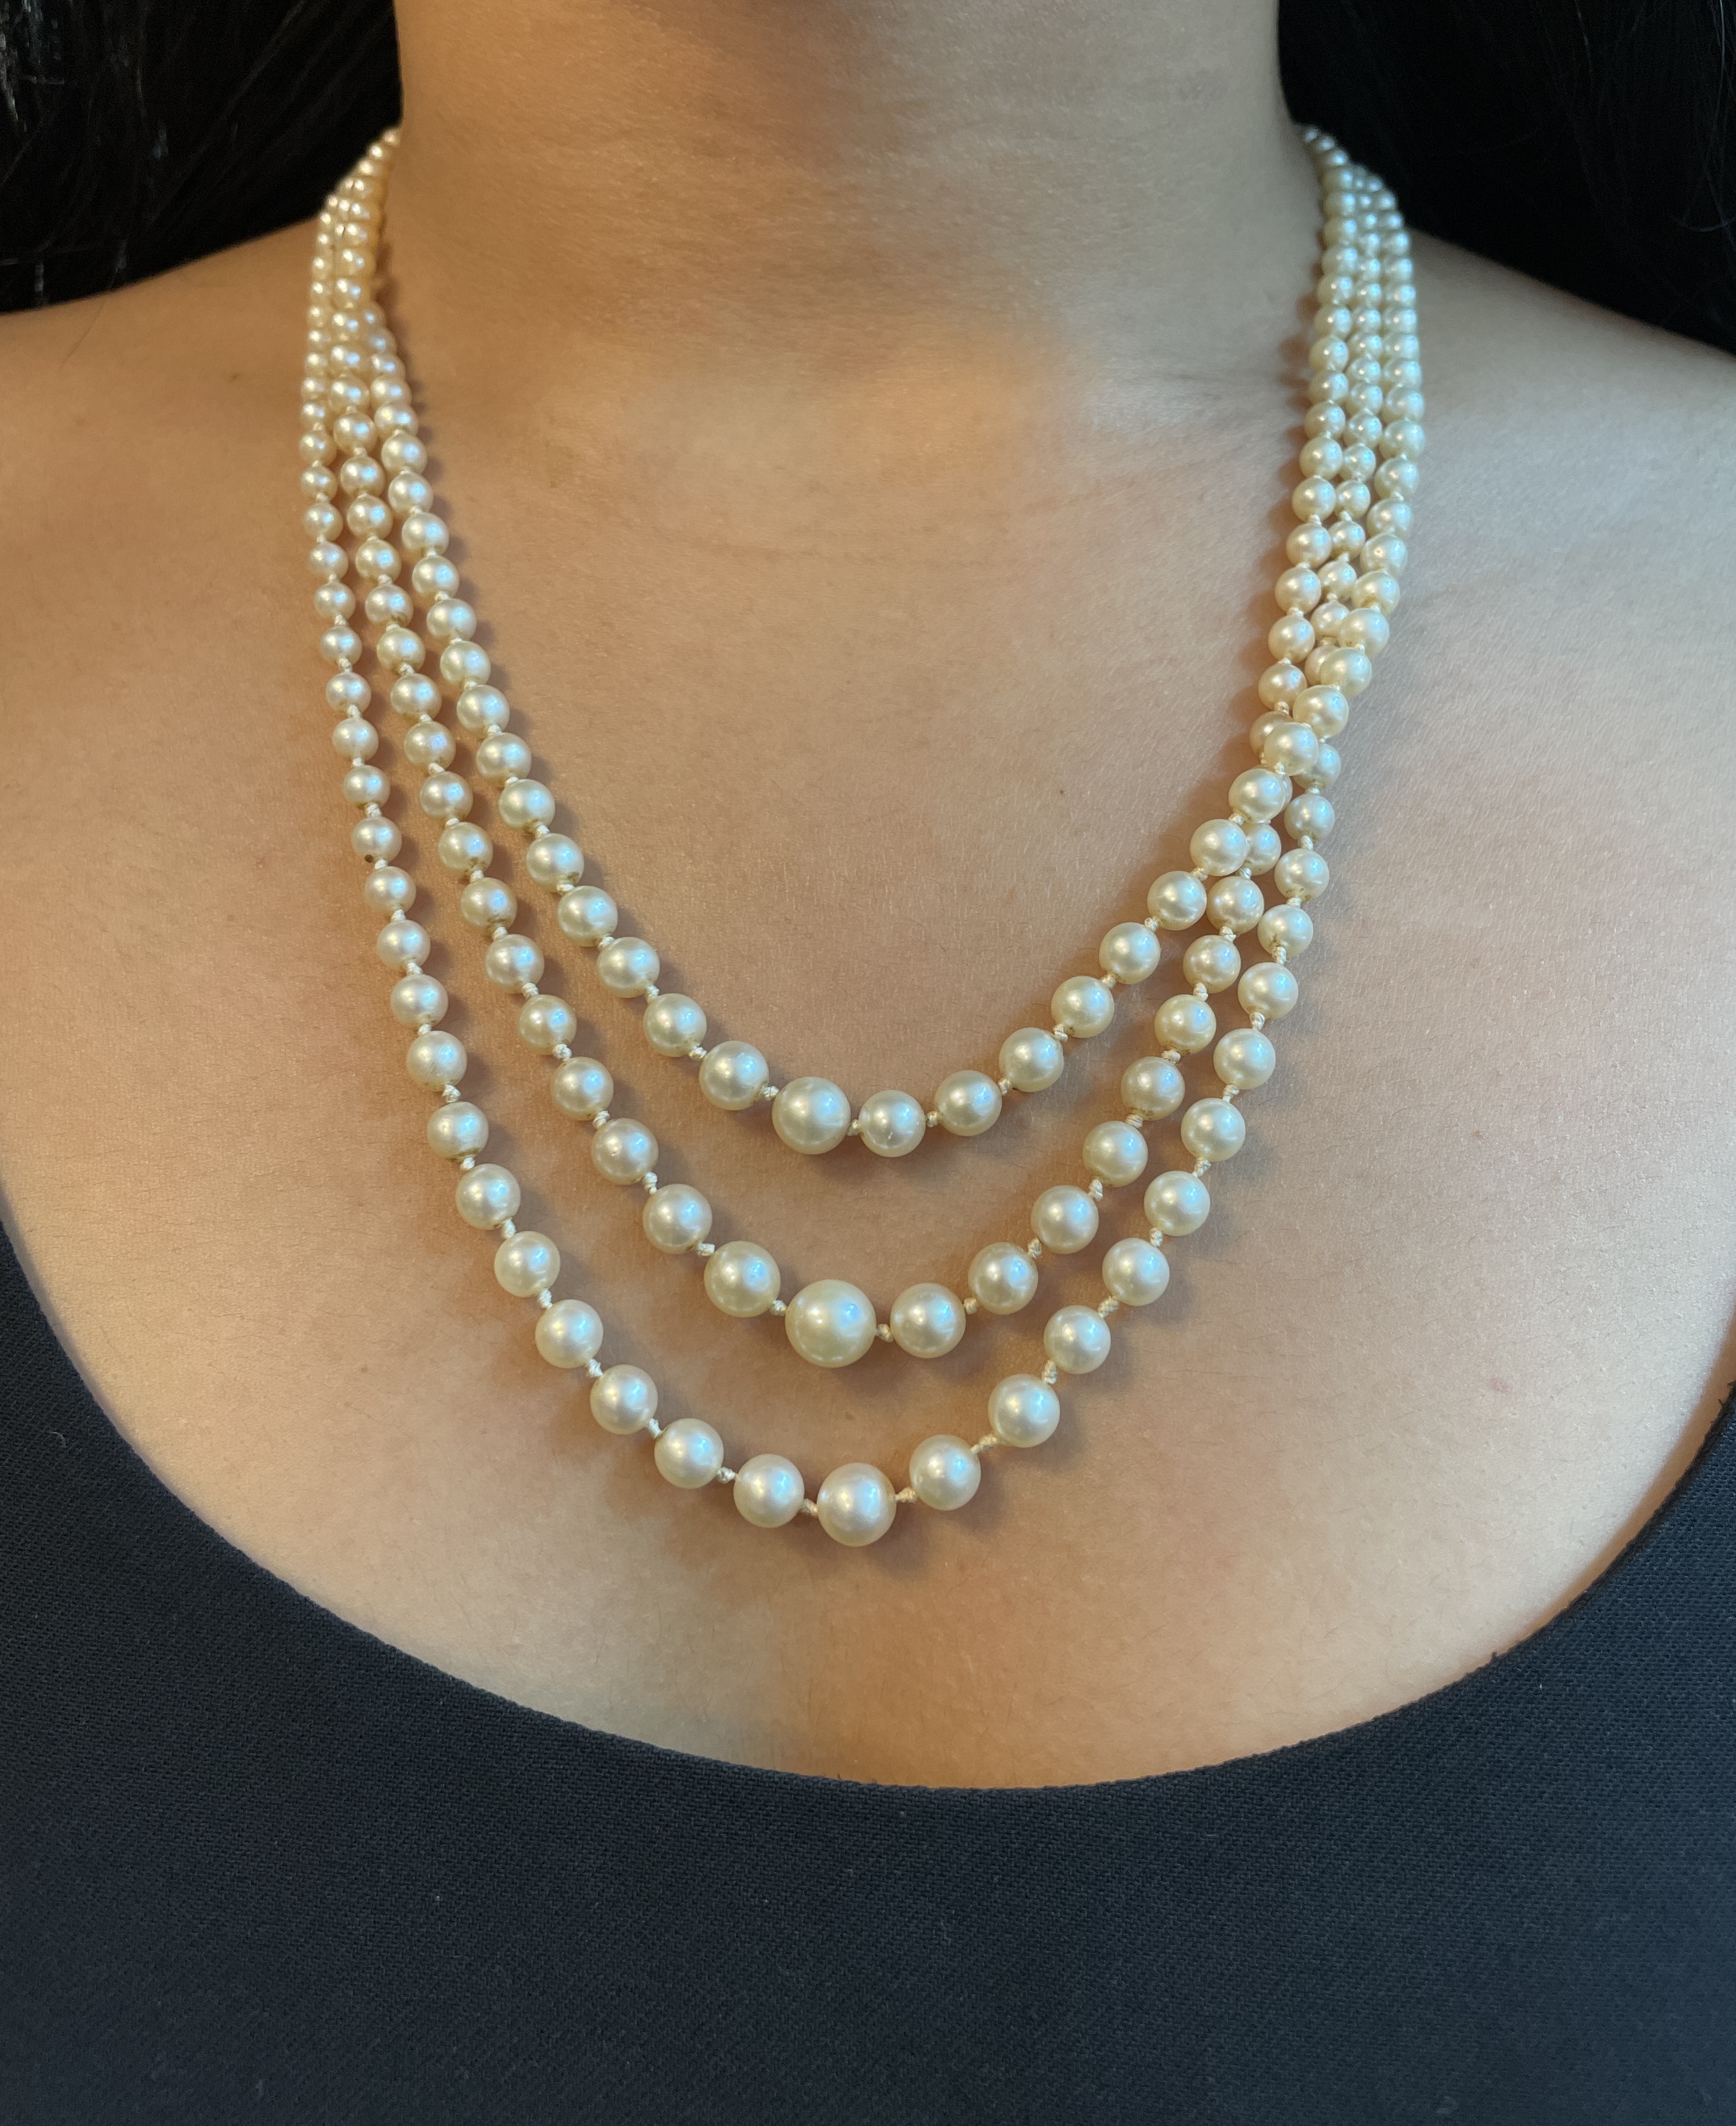 A THREE STRAND AKOYA CULTURED PEARL NECKLACE - Image 5 of 5